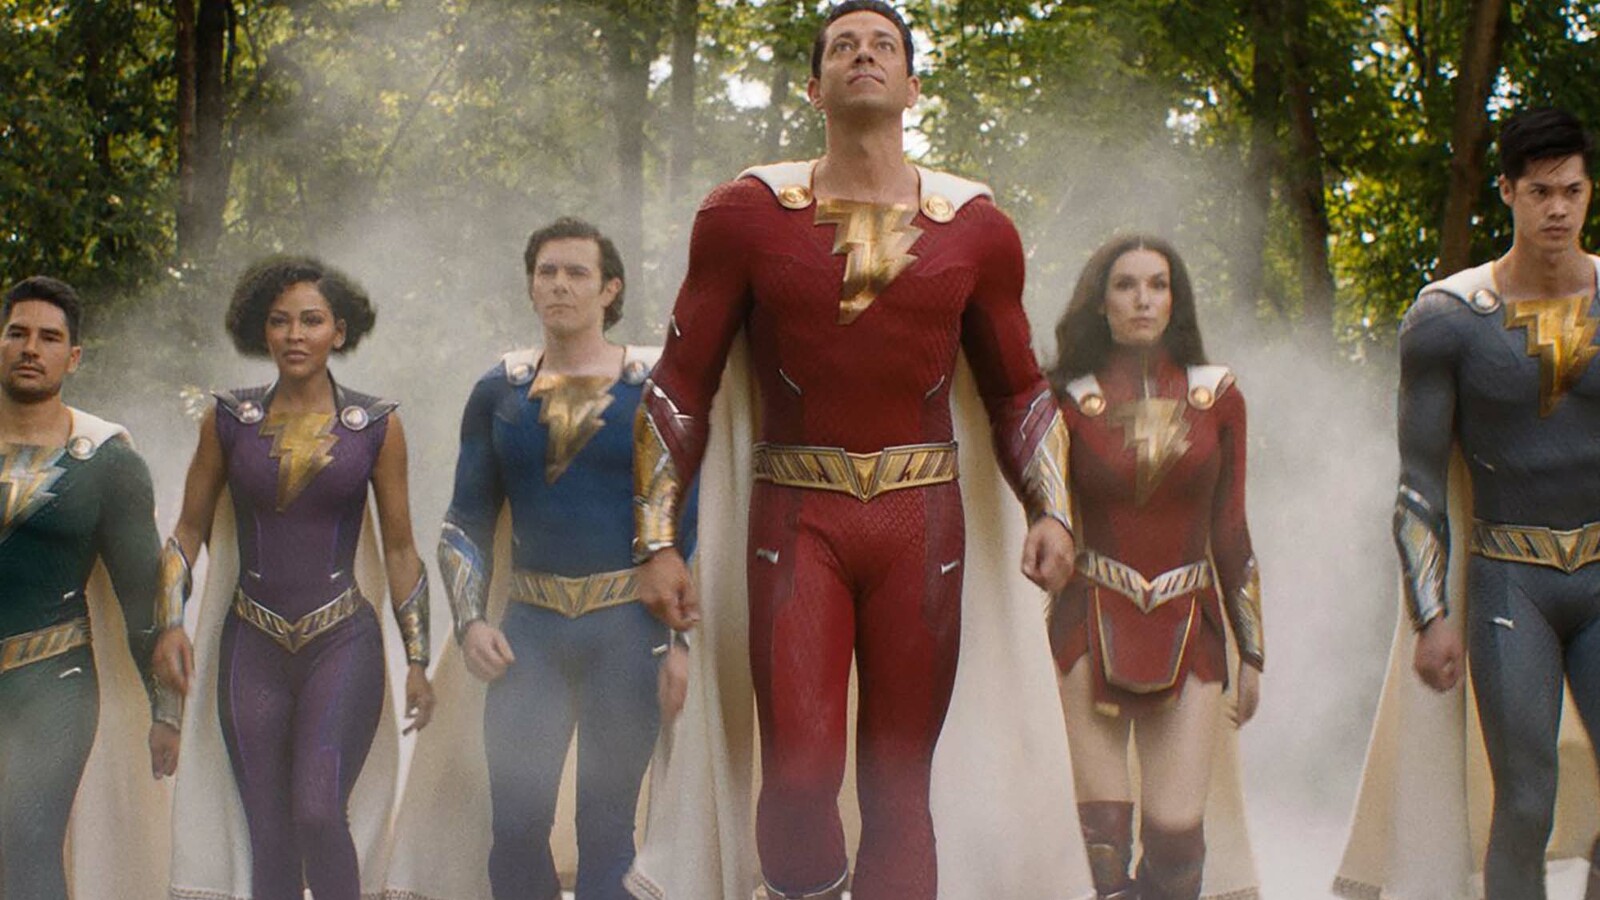 Shazam!  Will Fury of the Gods be released digitally sooner than expected due to the flop?